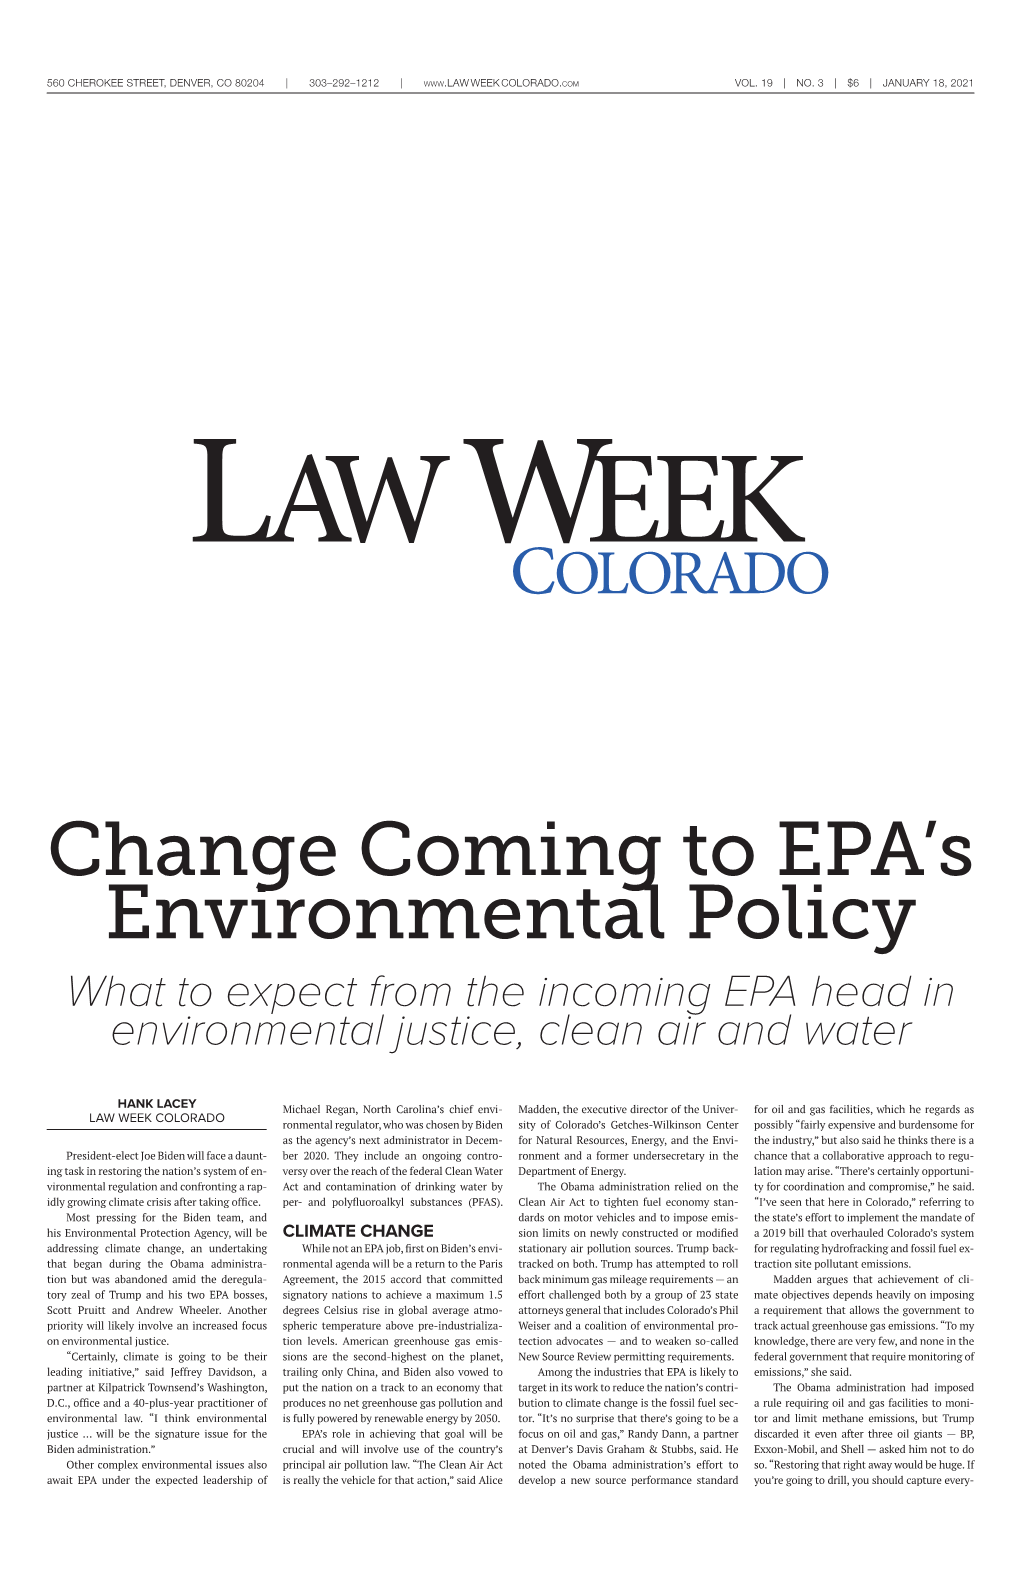 Change Coming to EPA's Environmental Policy